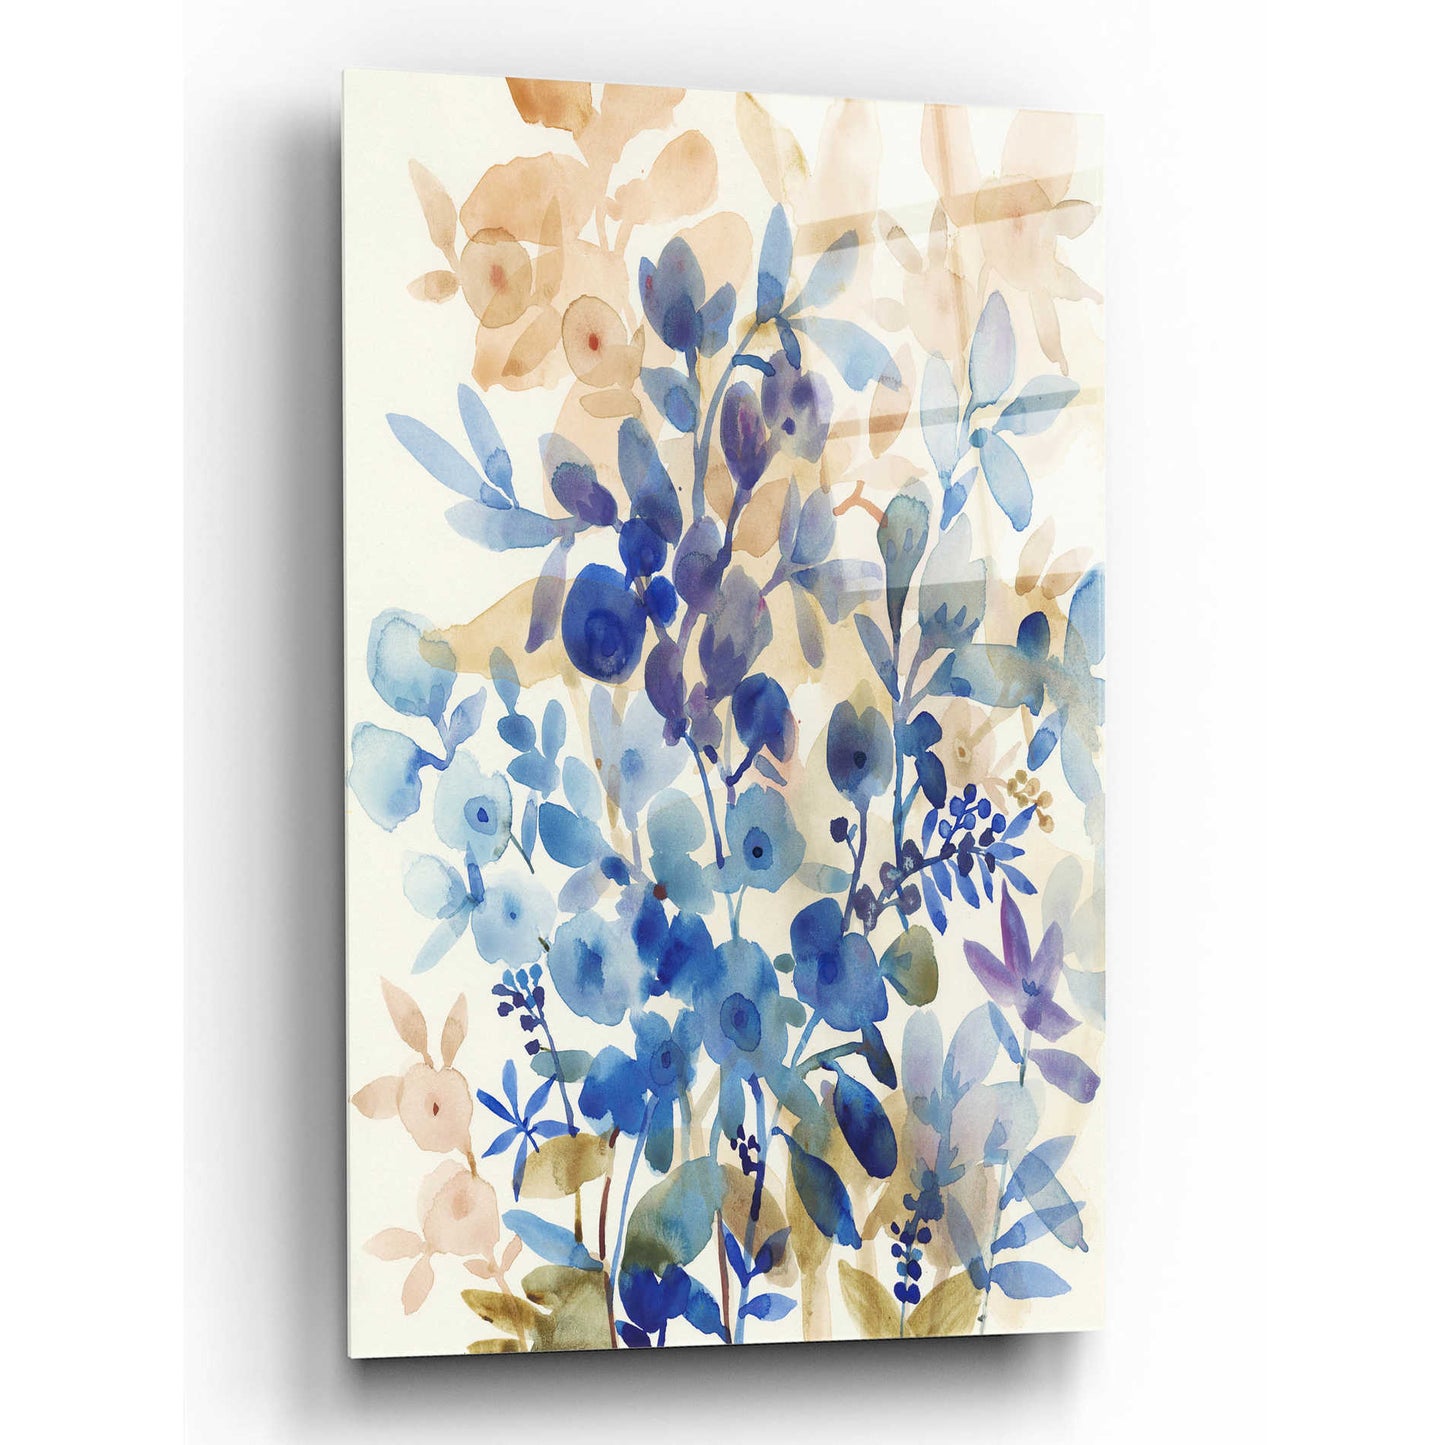 Epic Art 'Blueberry Floral I' by Tim O'Toole, Acrylic Glass Wall Art